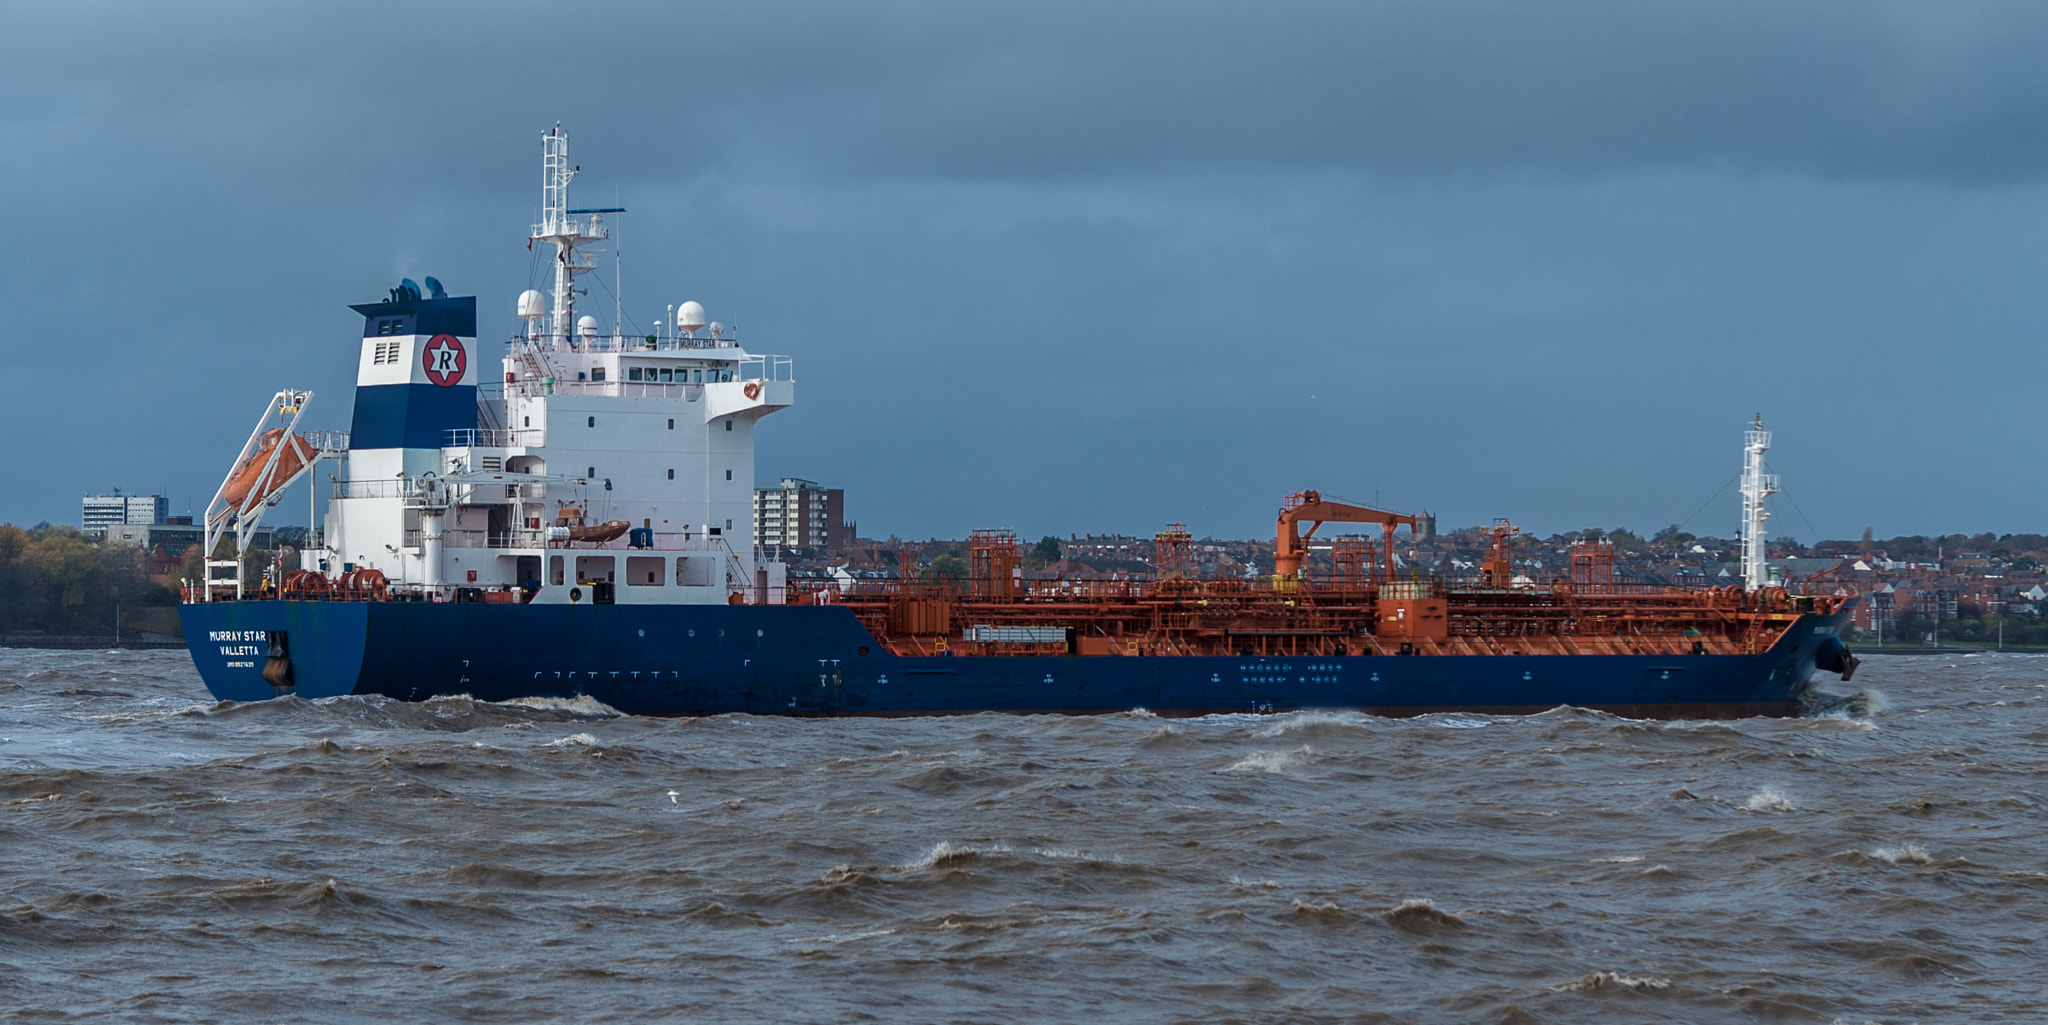 Sony a7S sample photo. Tanker photography